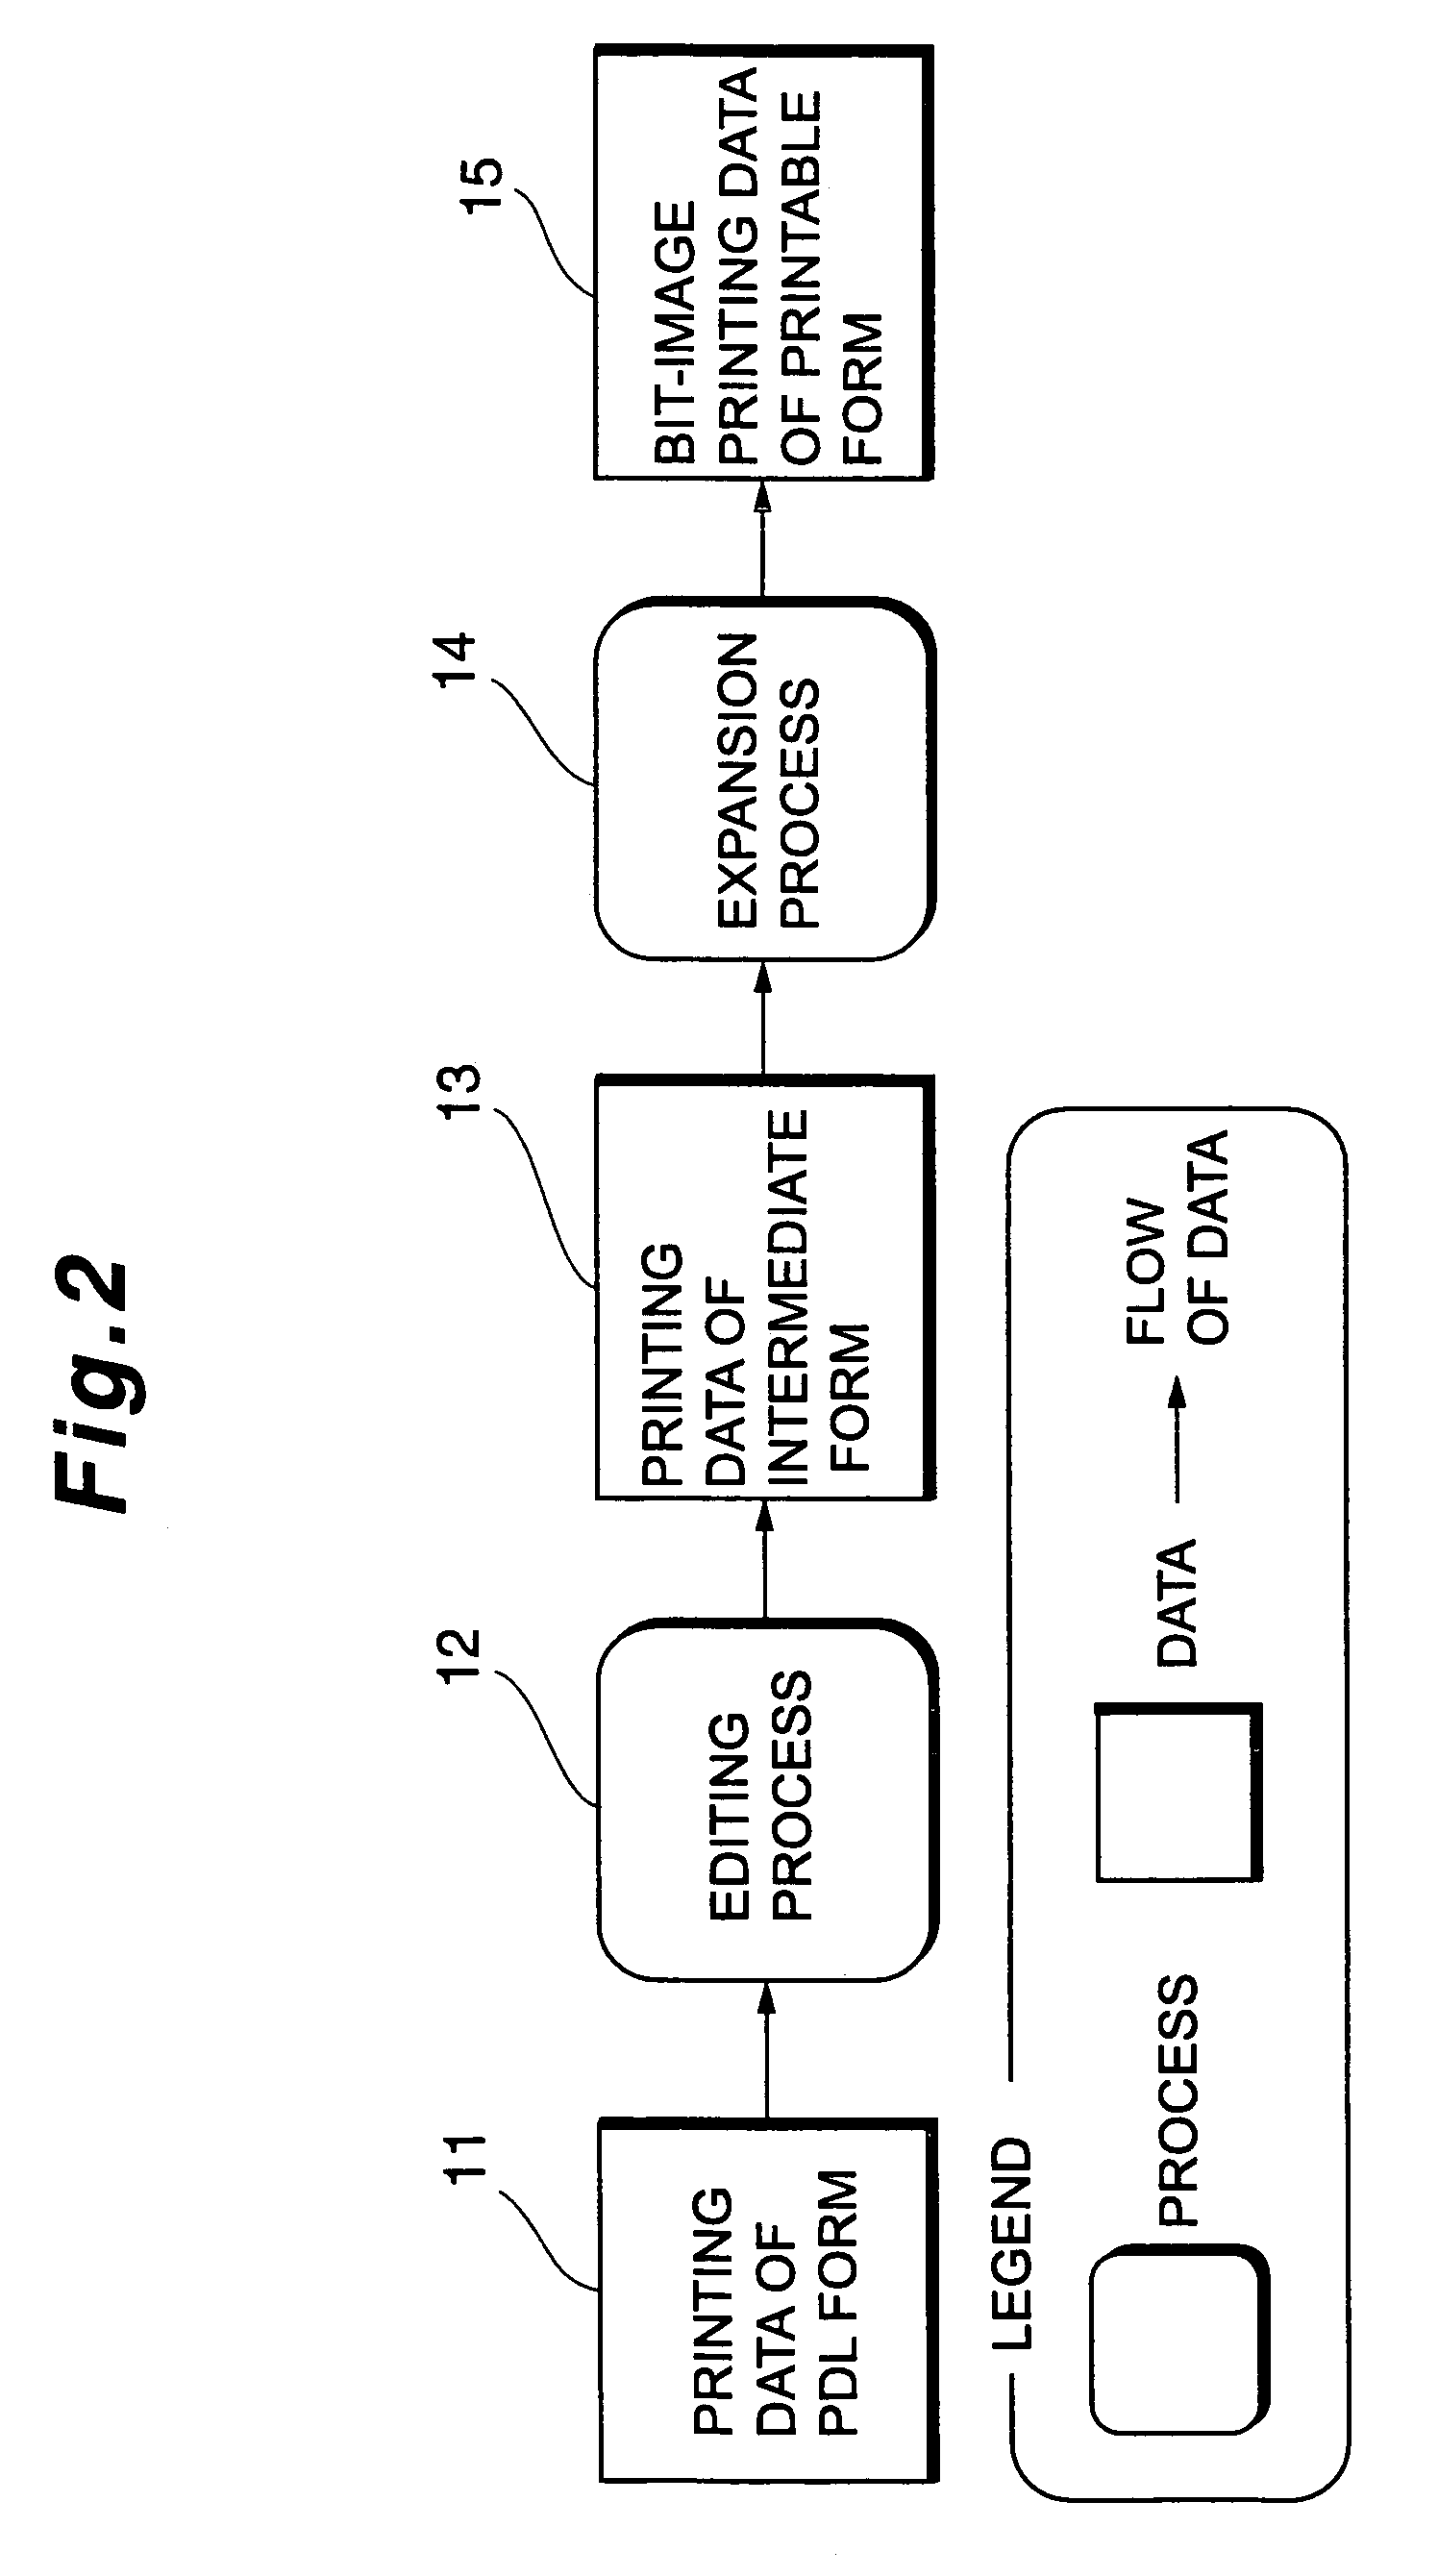 Printing data processor which manages memory